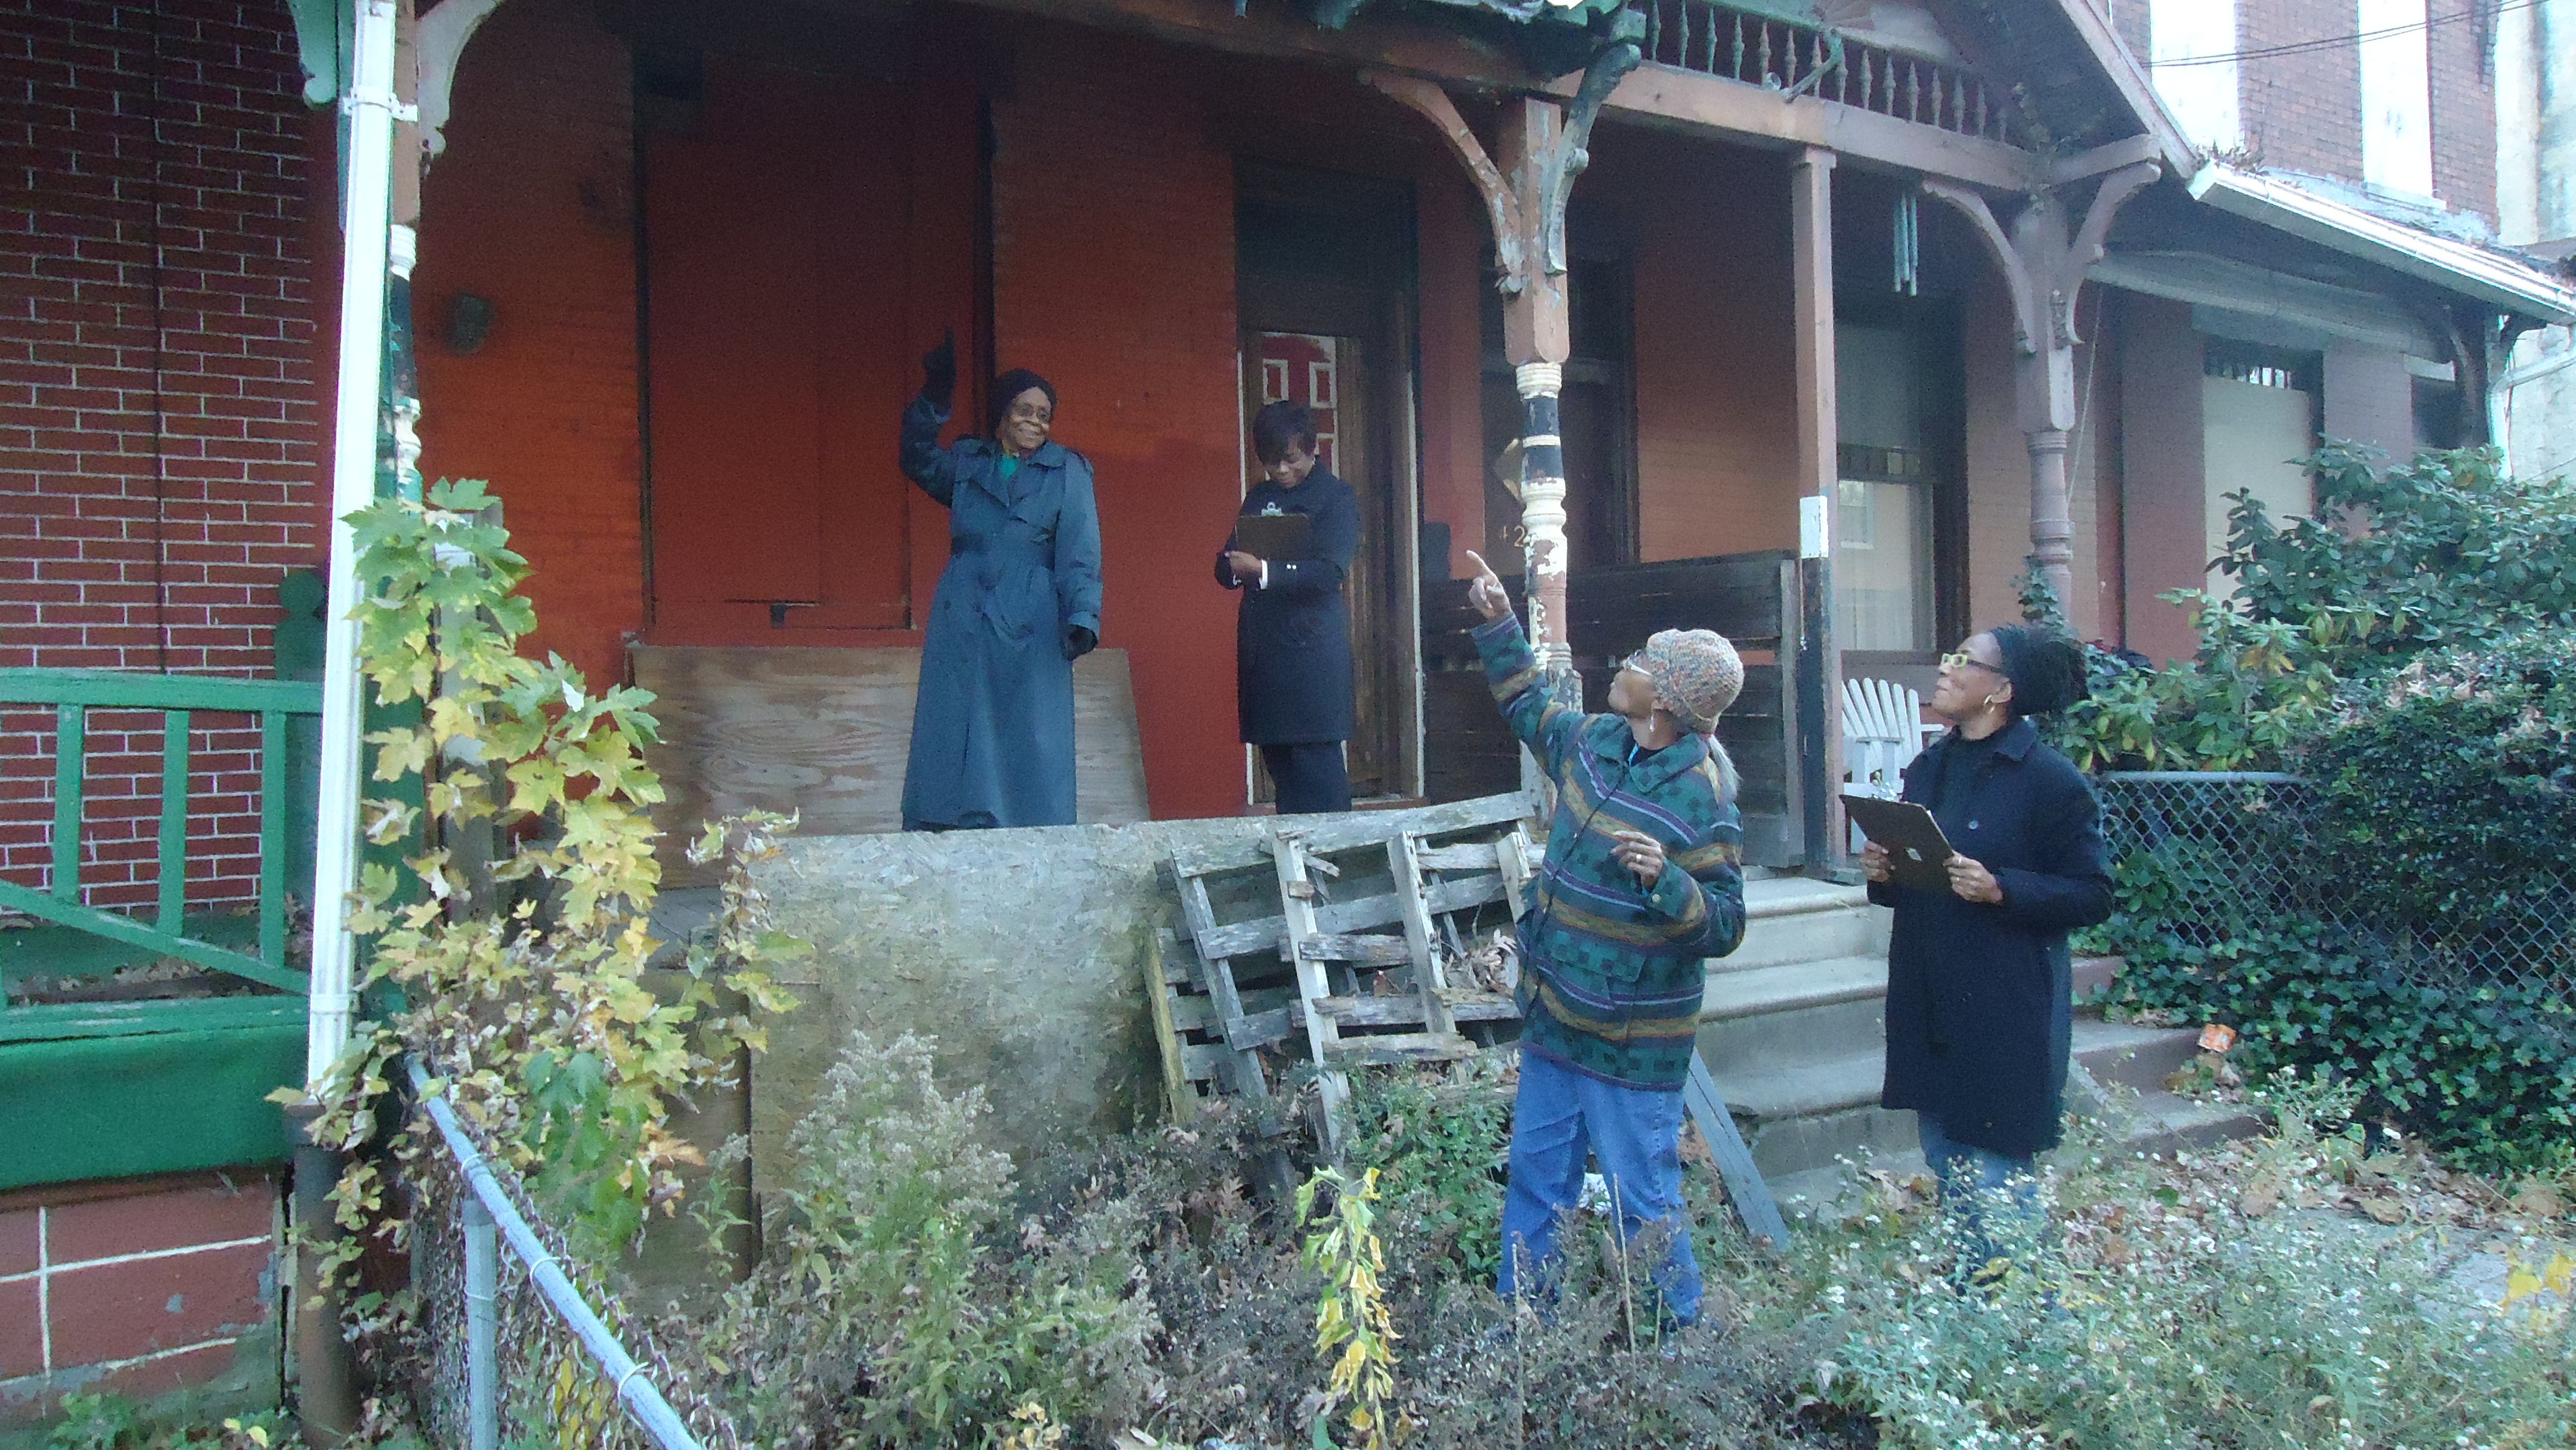 Members of the Viola Street Residents Association conducting an inventory of vacant property on their street.